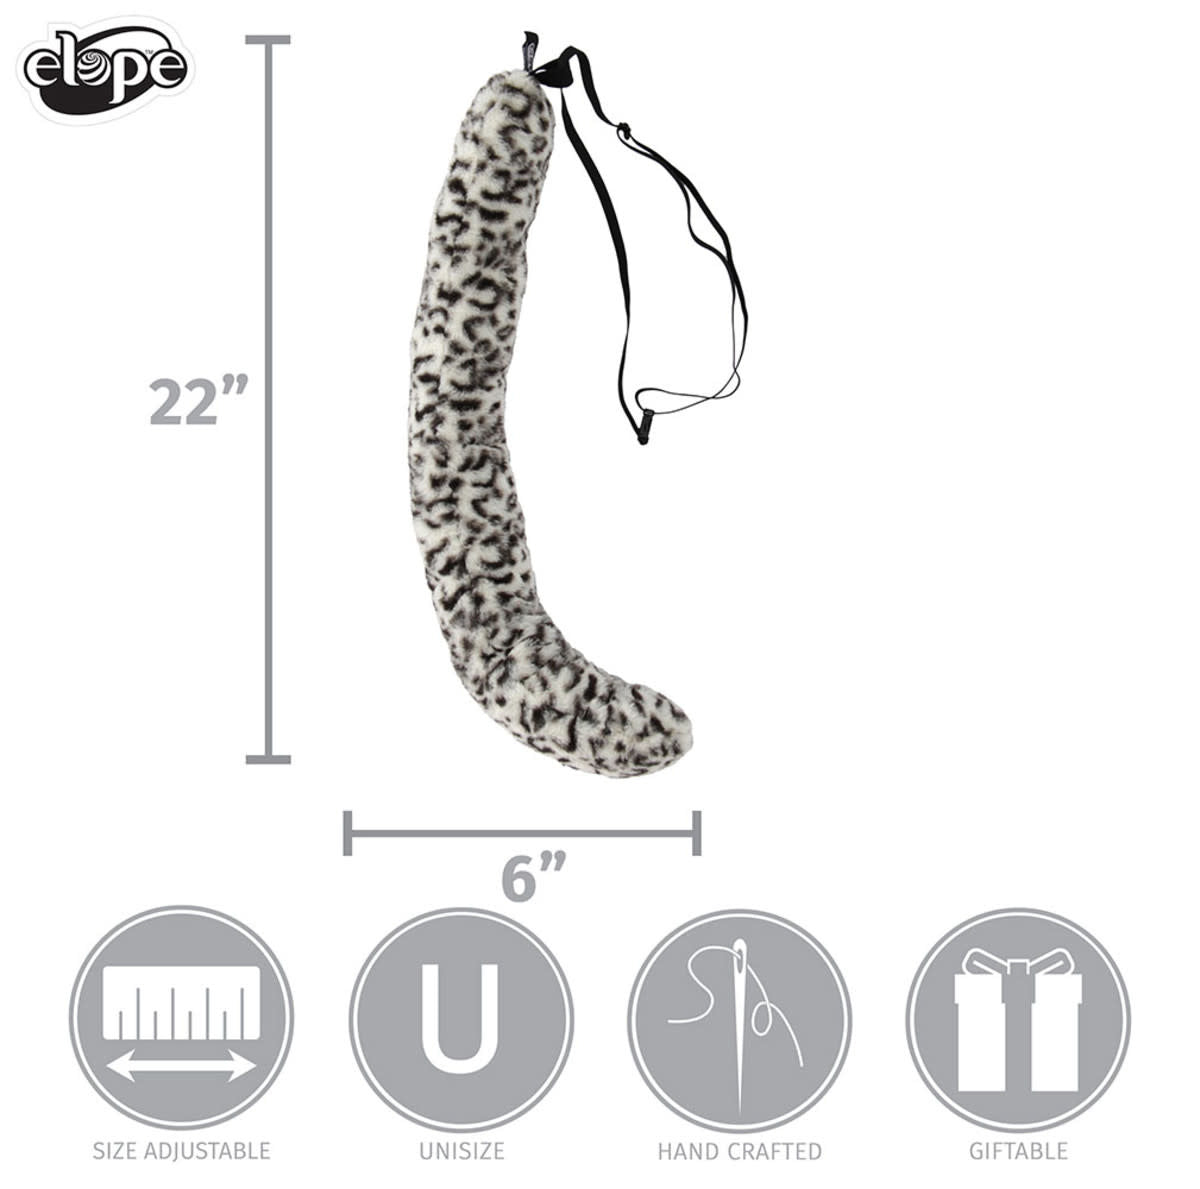 Deluxe Snow Leopard Plush Tail